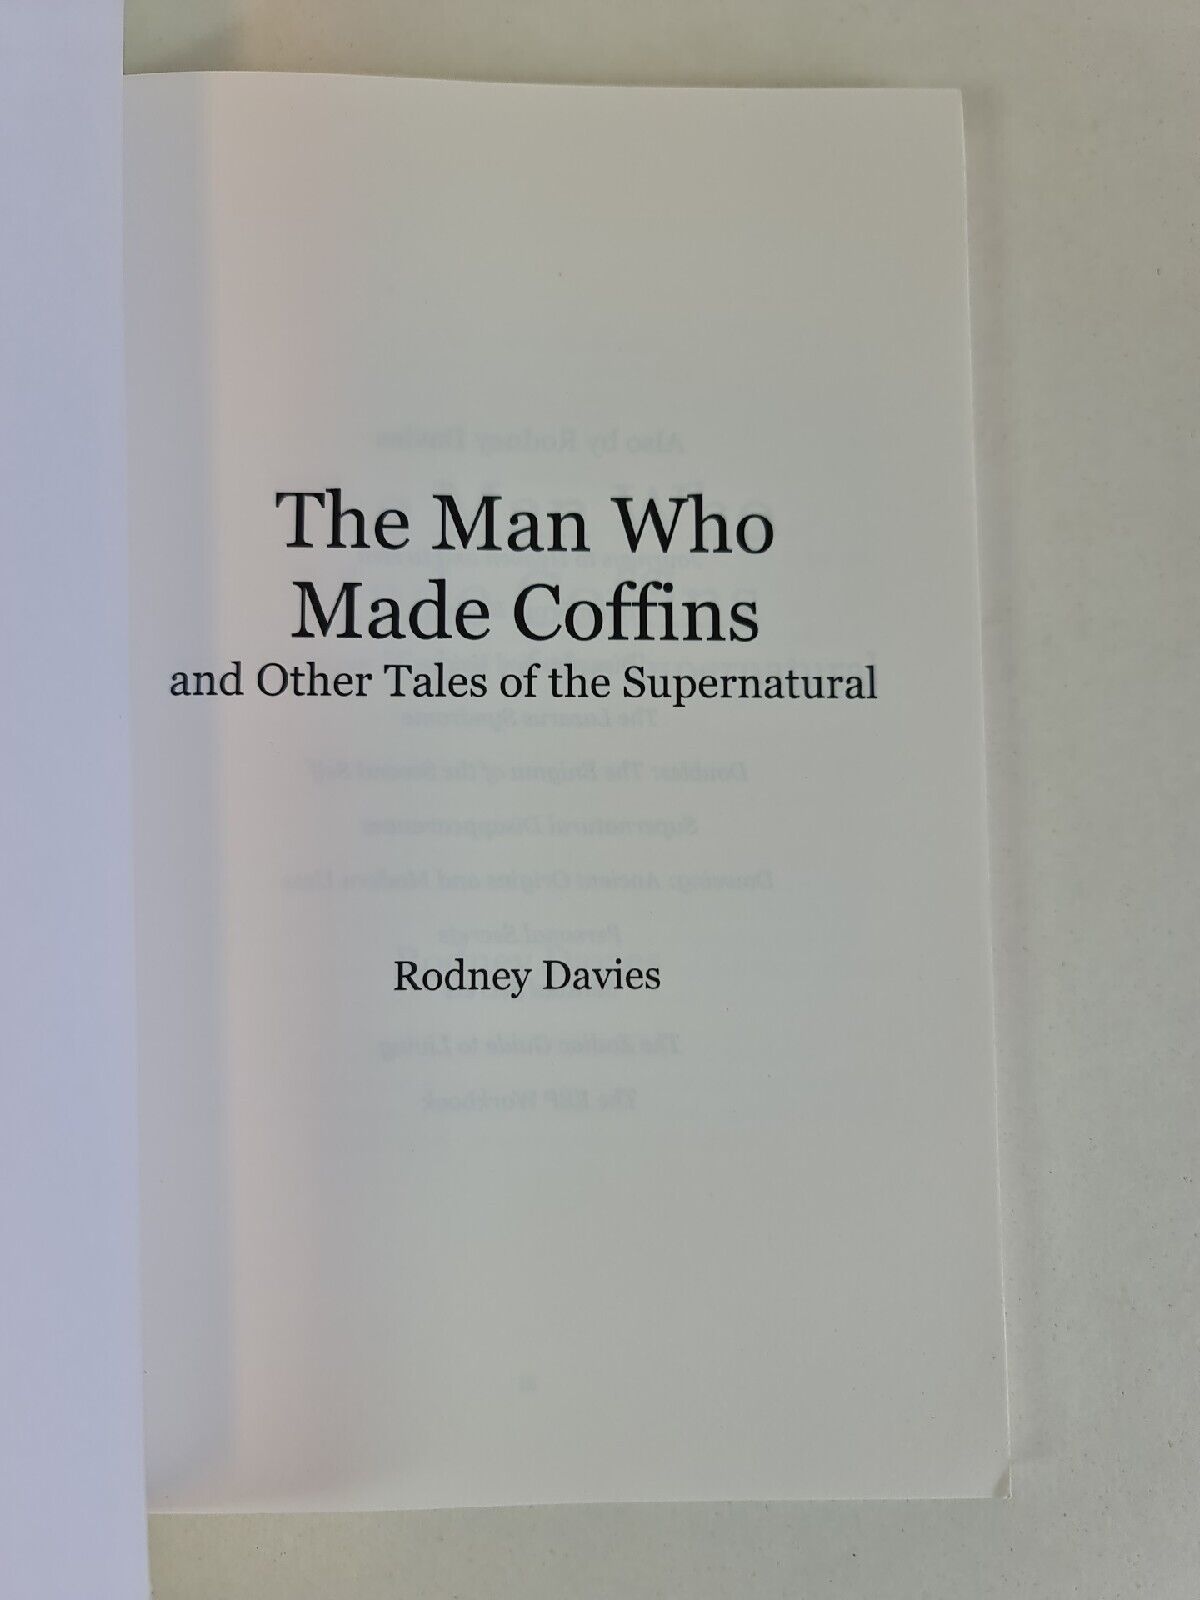 The Man Who Made Coffins and Other Tales of ... by Rodney Davies (2018)